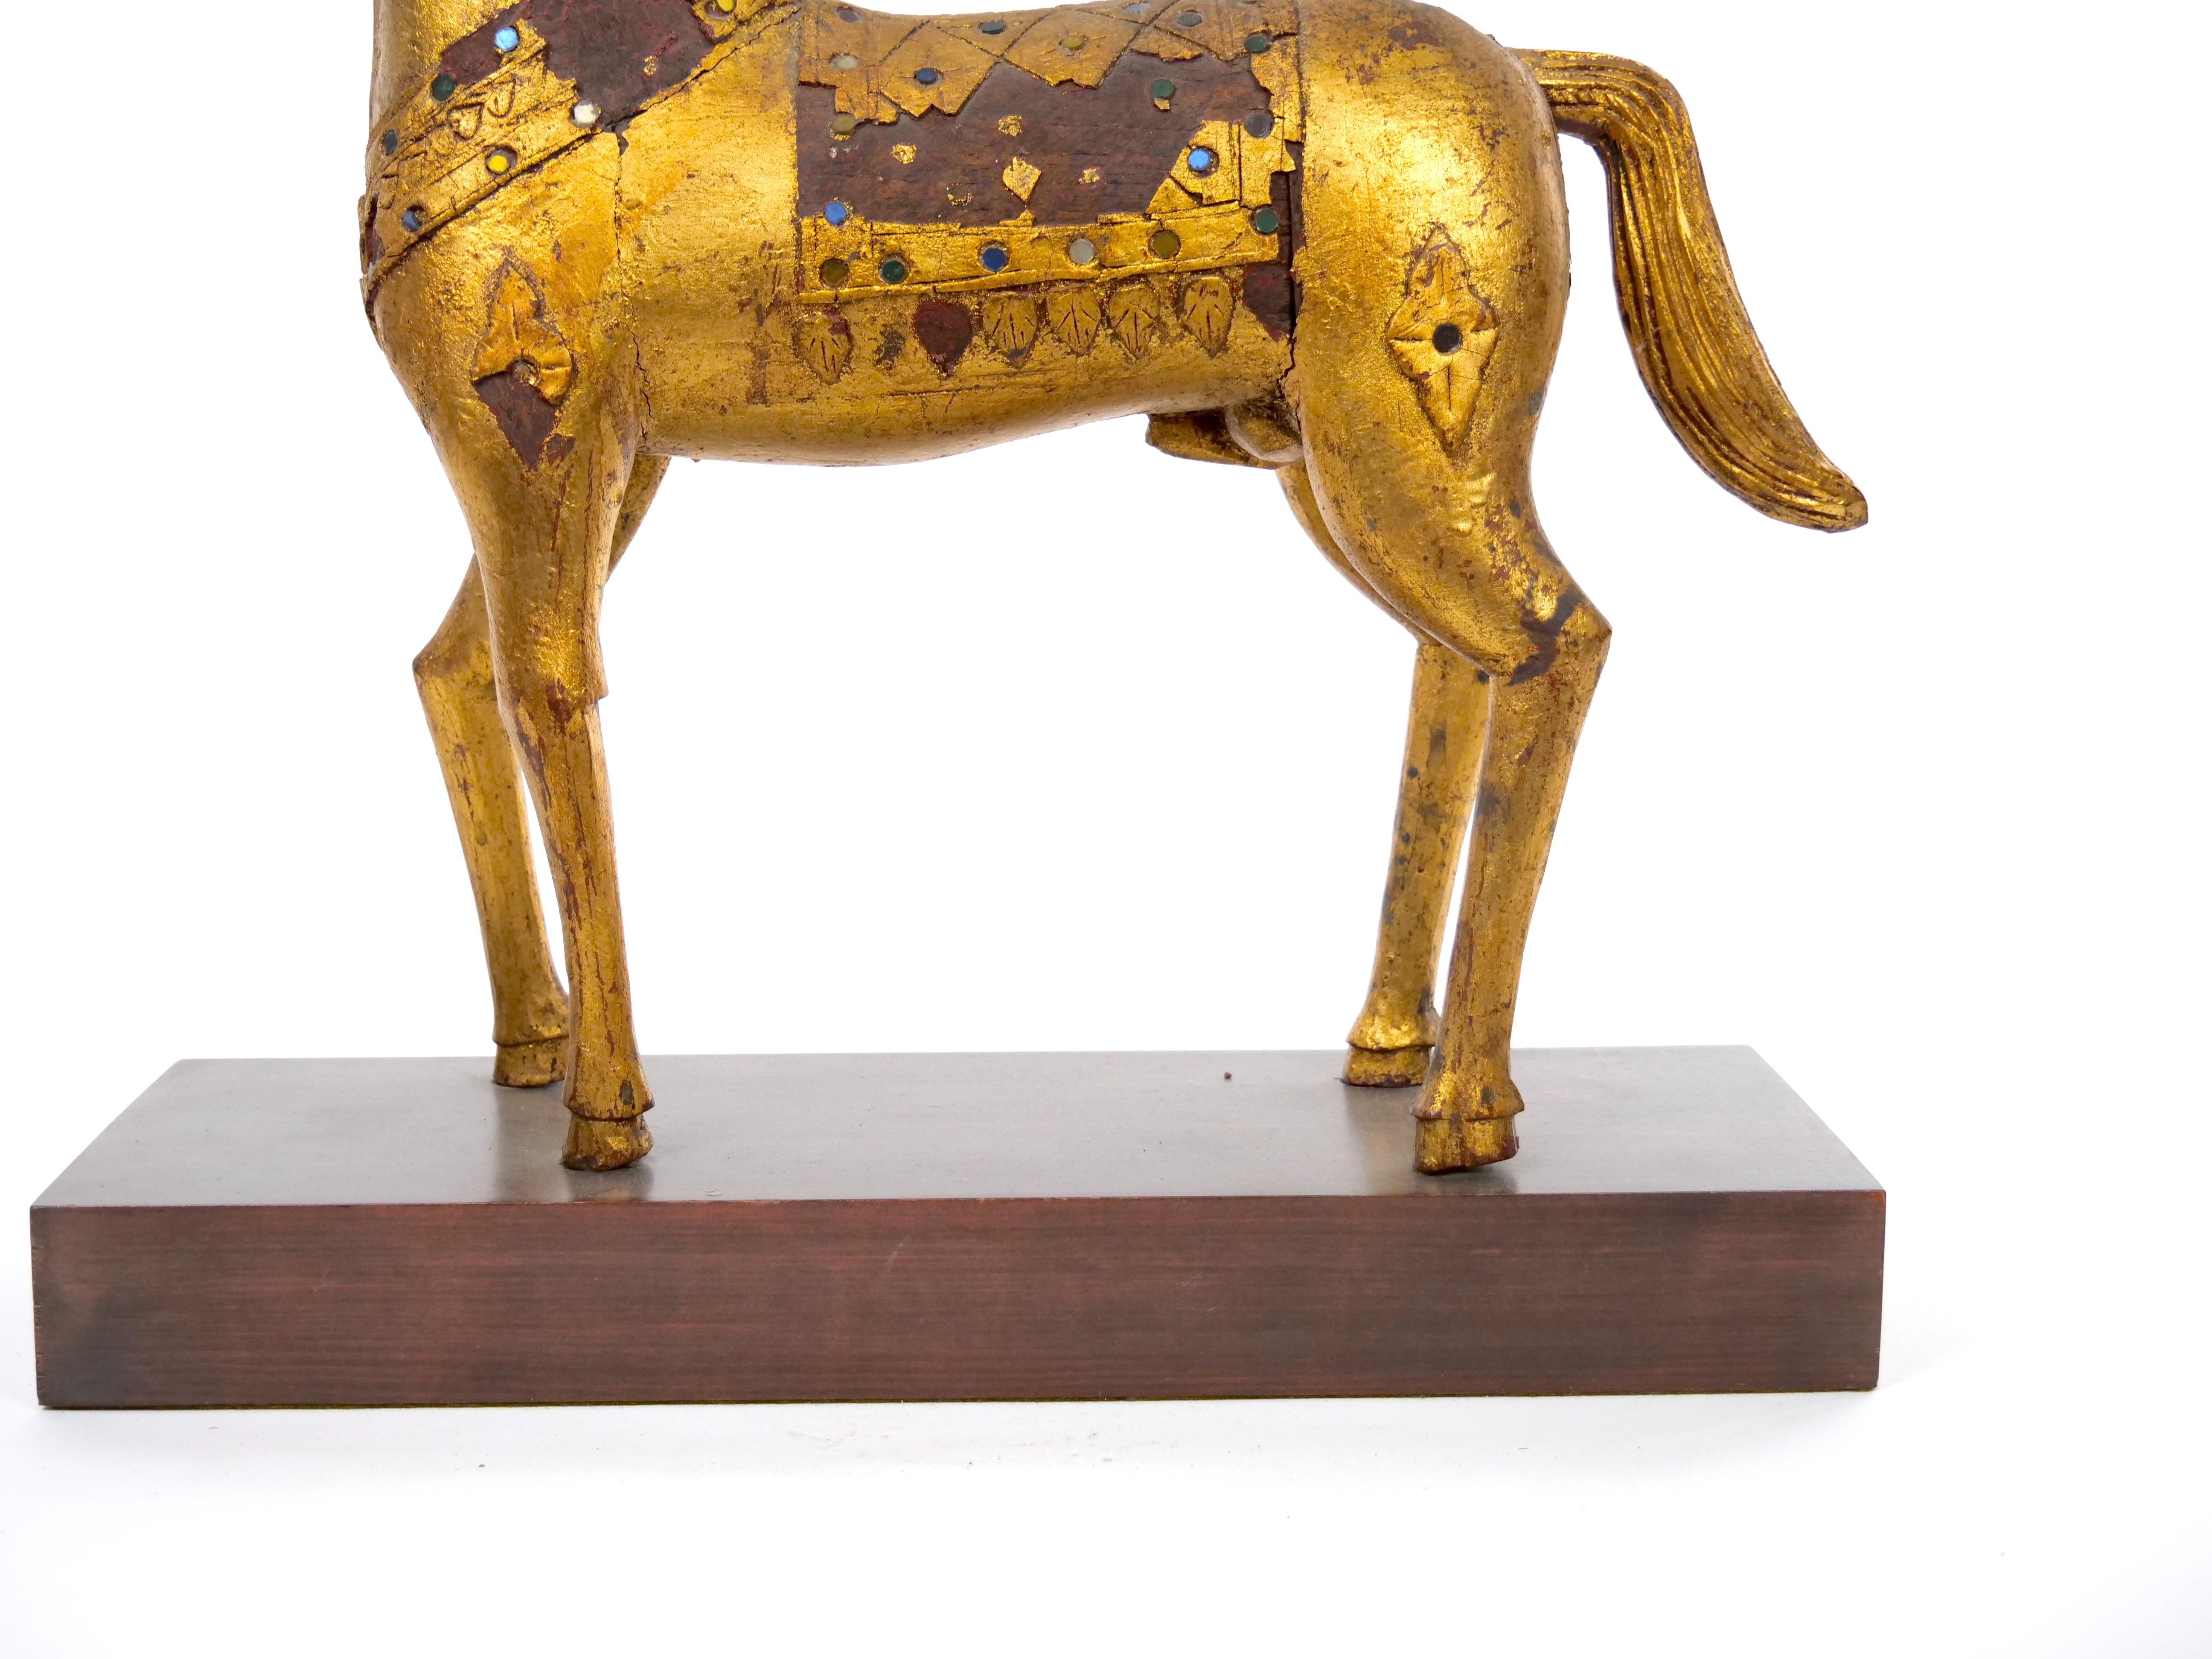 20th Century Hand Carved Gilt Gold Animal Sculpture / Wood Base Decorative Piece For Sale